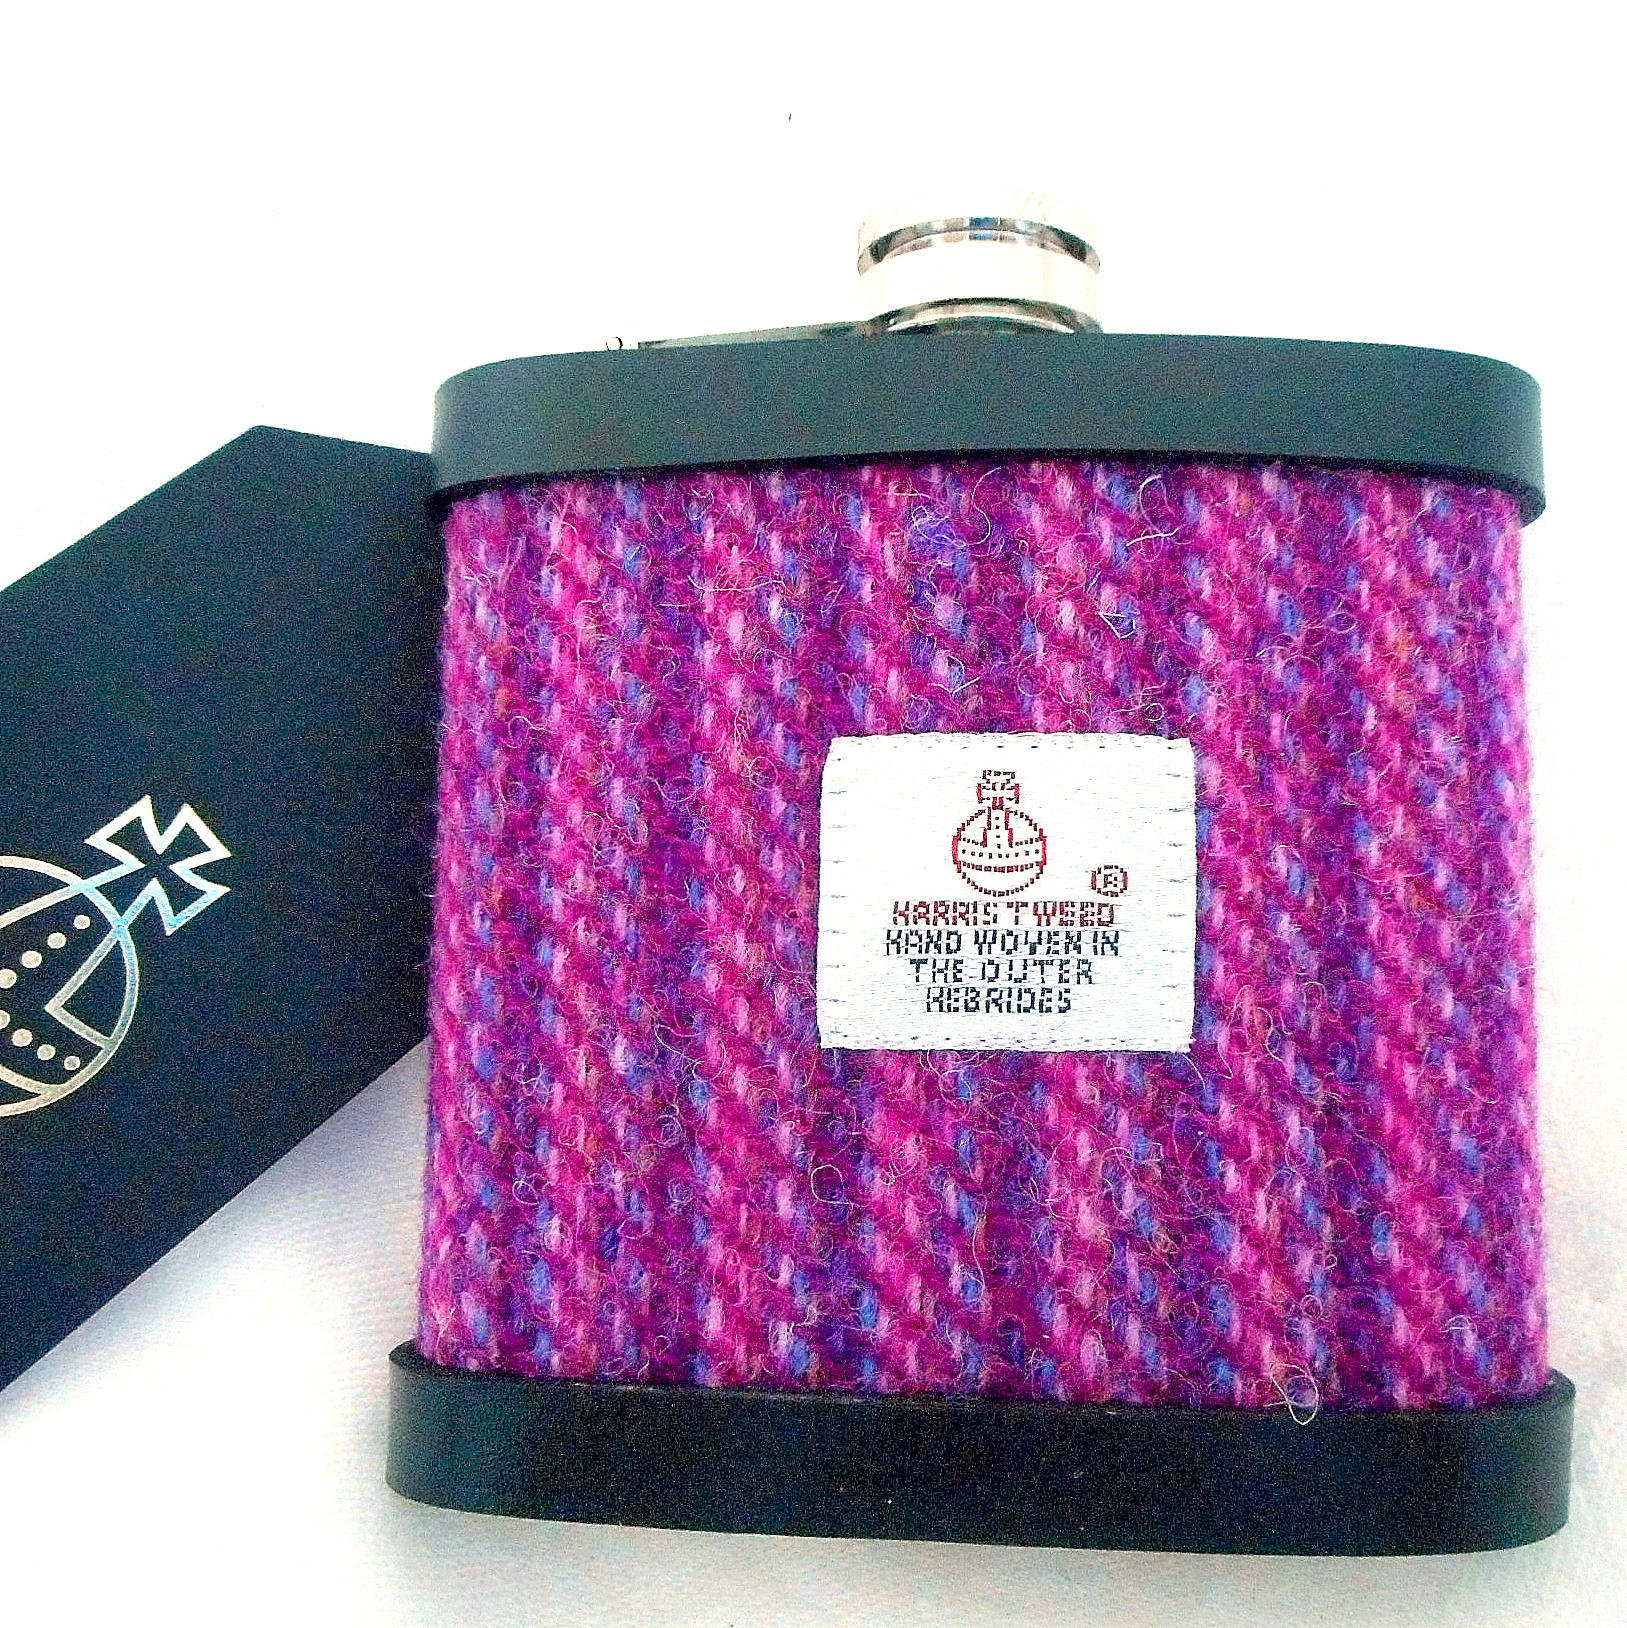 Bridesmaid gifts set of 3,4,5 or 6 , choice of Pinks / purples,  Harris Tweed hip flasks Scottish  luxury gift, personalesed box,  for wedding favour or hen party